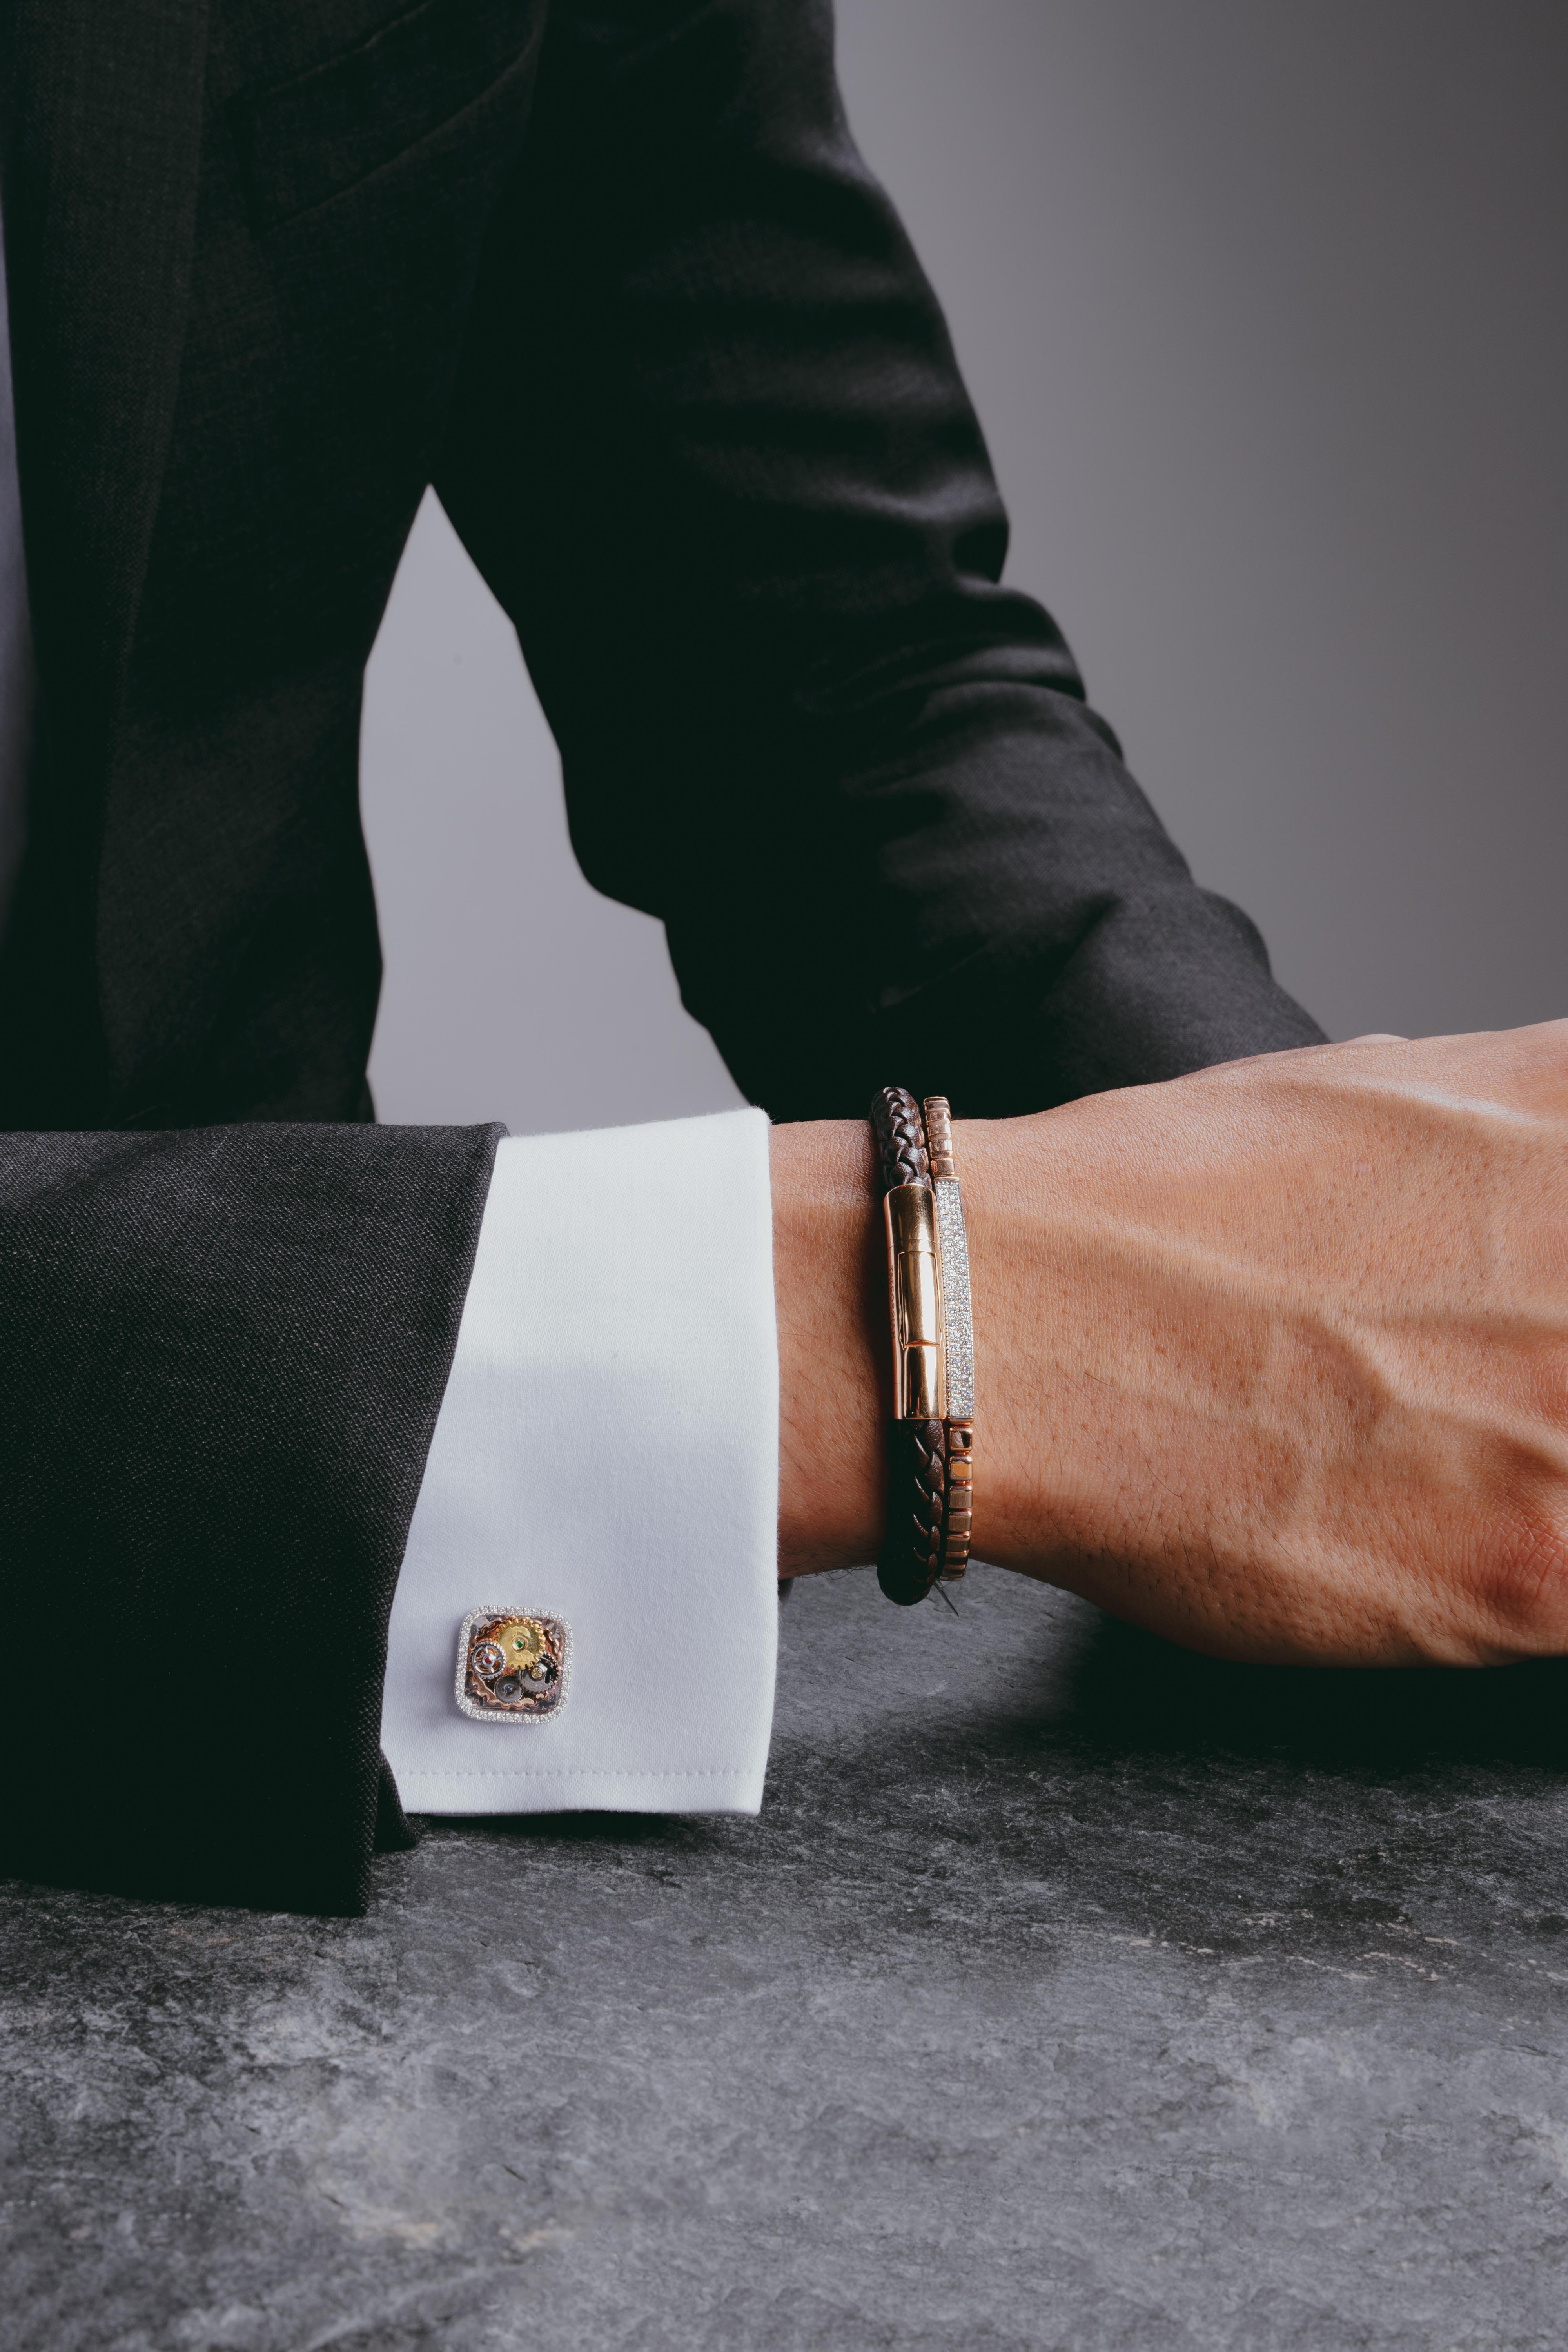 You simply can’t beat the sheer luxury and elegance of diamonds, and this beautifully handcrafted men’s bracelet proves it. The inner elastic is concealed by the 18K rose gold inner tube, and the bracelet's central bar is pave set with 120 white